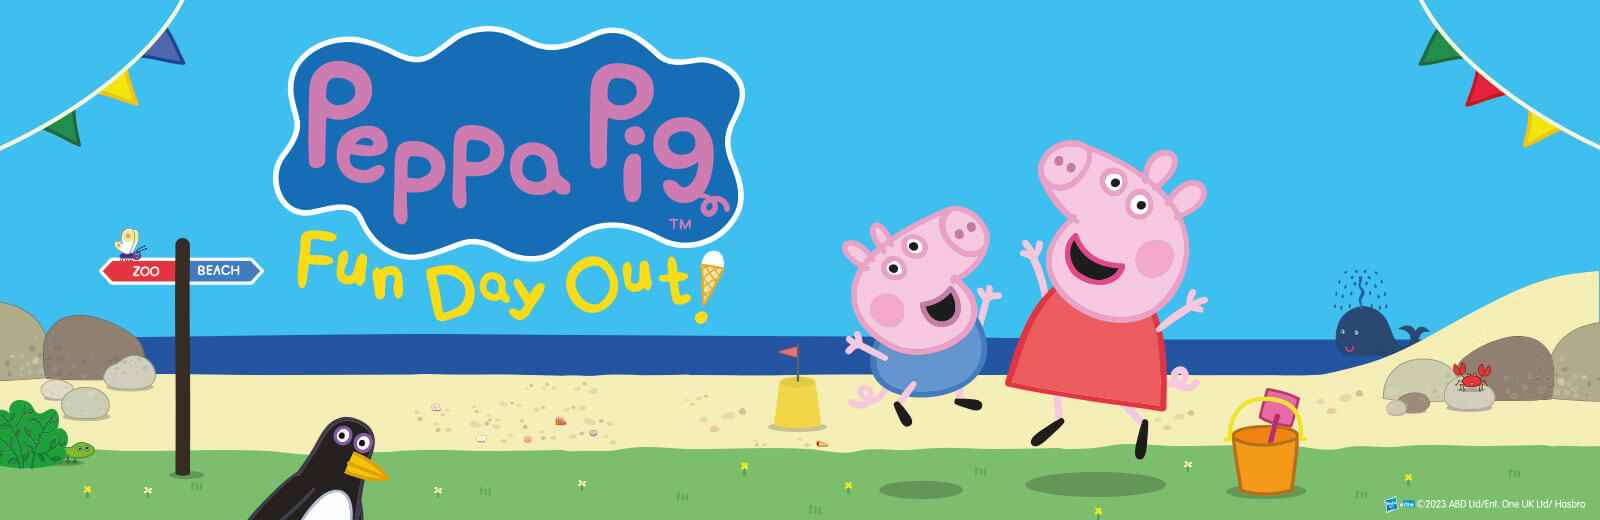 Peppa Pig's Fun Day Out